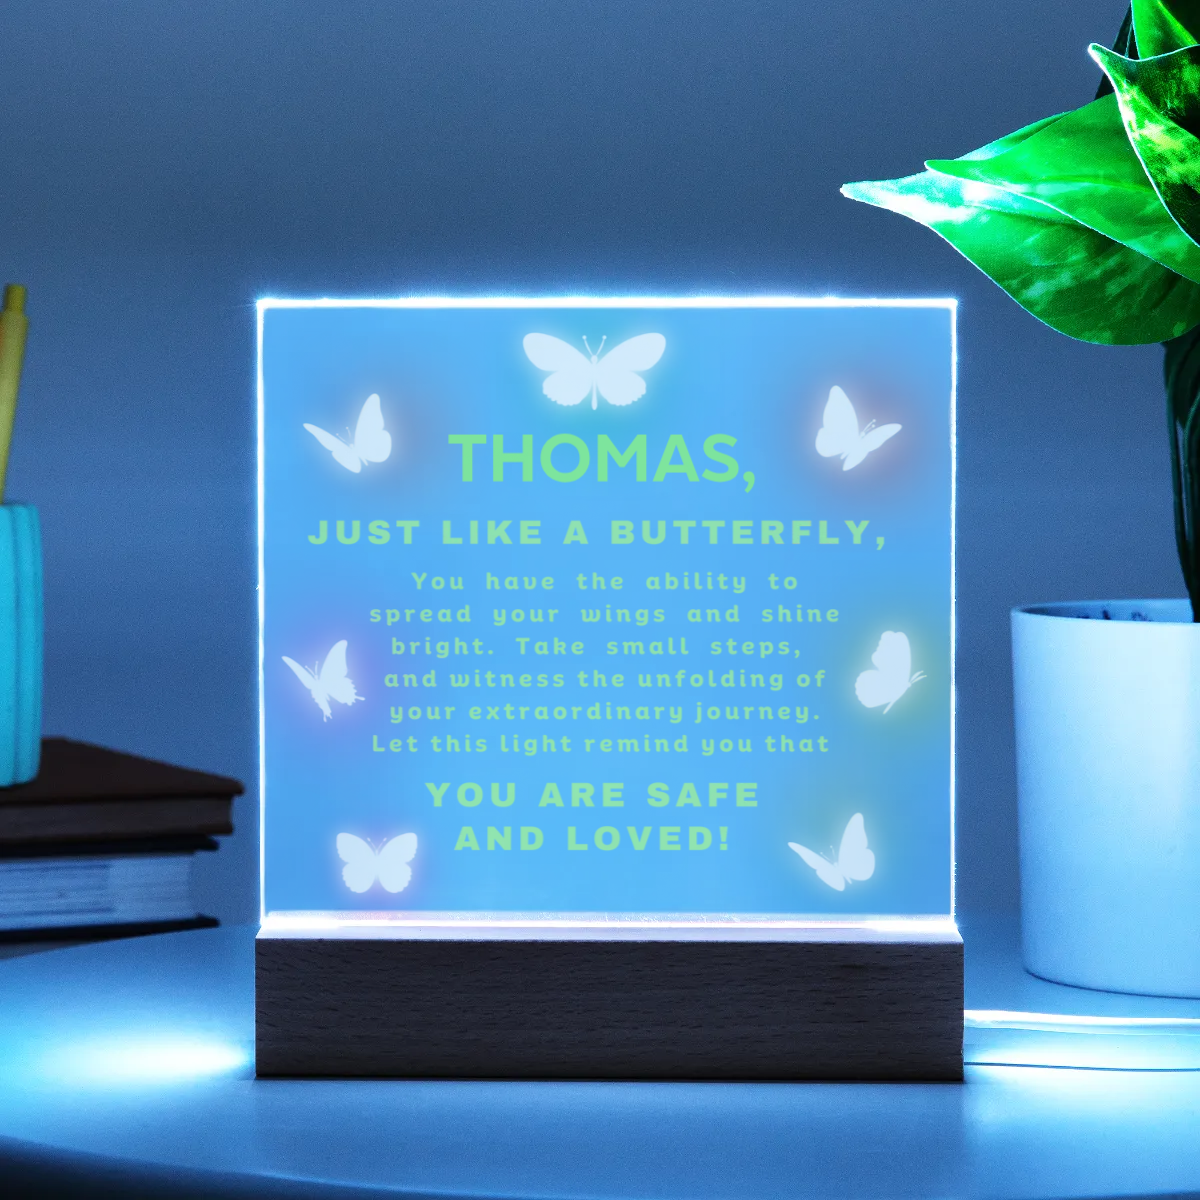 Radiant Wings Personalized Light Plaque 🦋✨